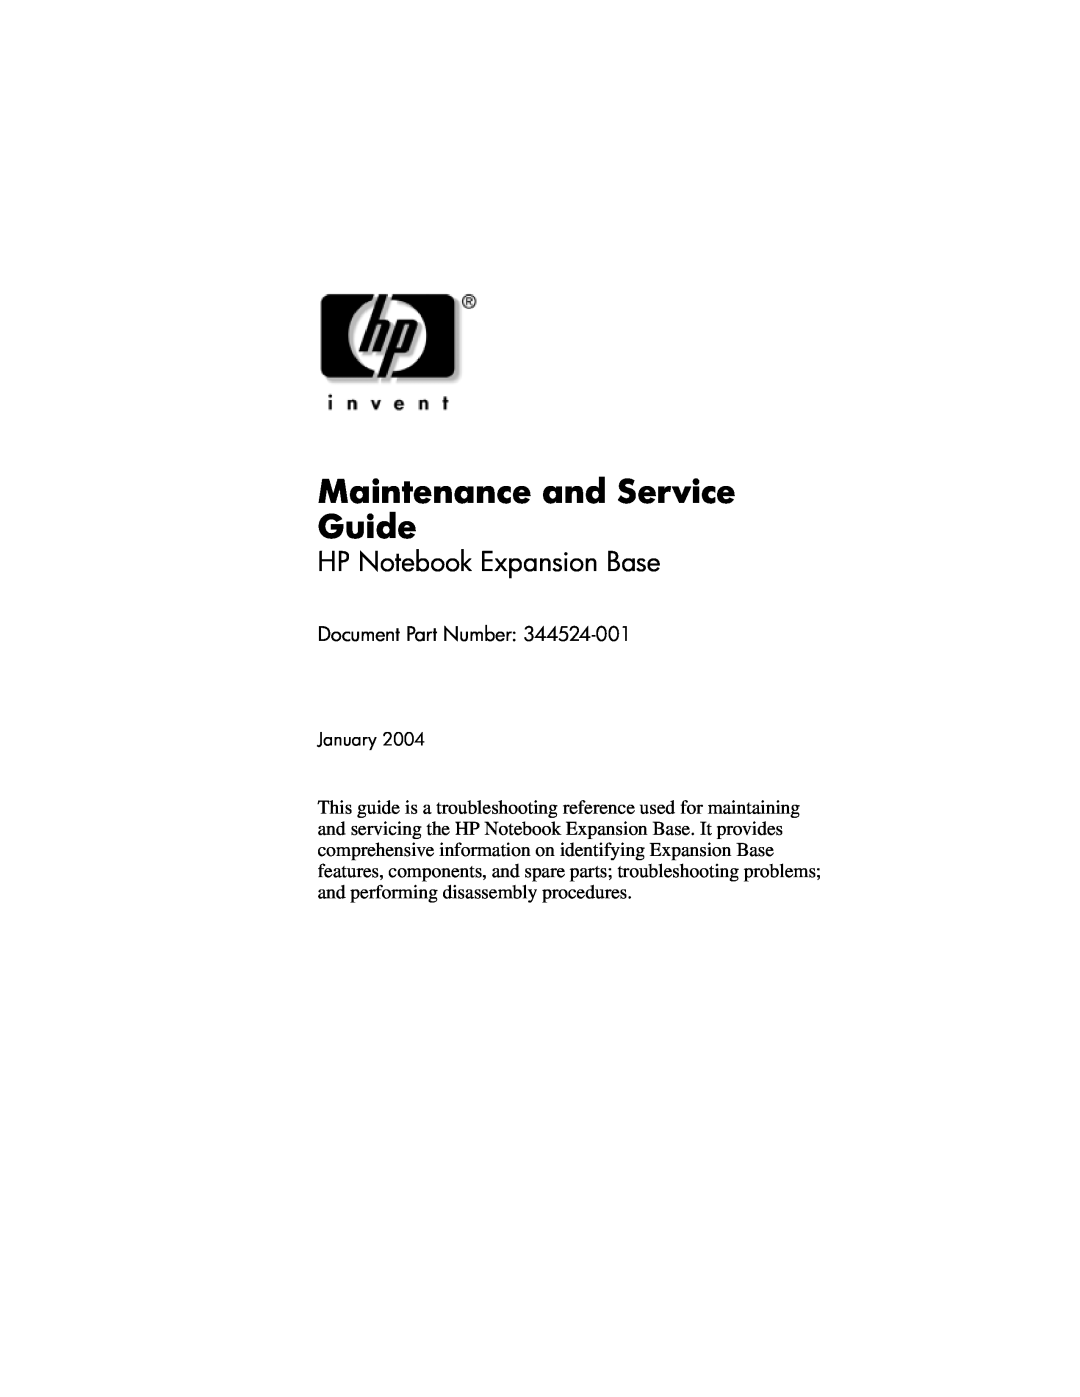 HP R3070US, R3065US, R3001 manual Maintenance and Service Guide, HP Notebook Expansion Base, Document Part Number, January 